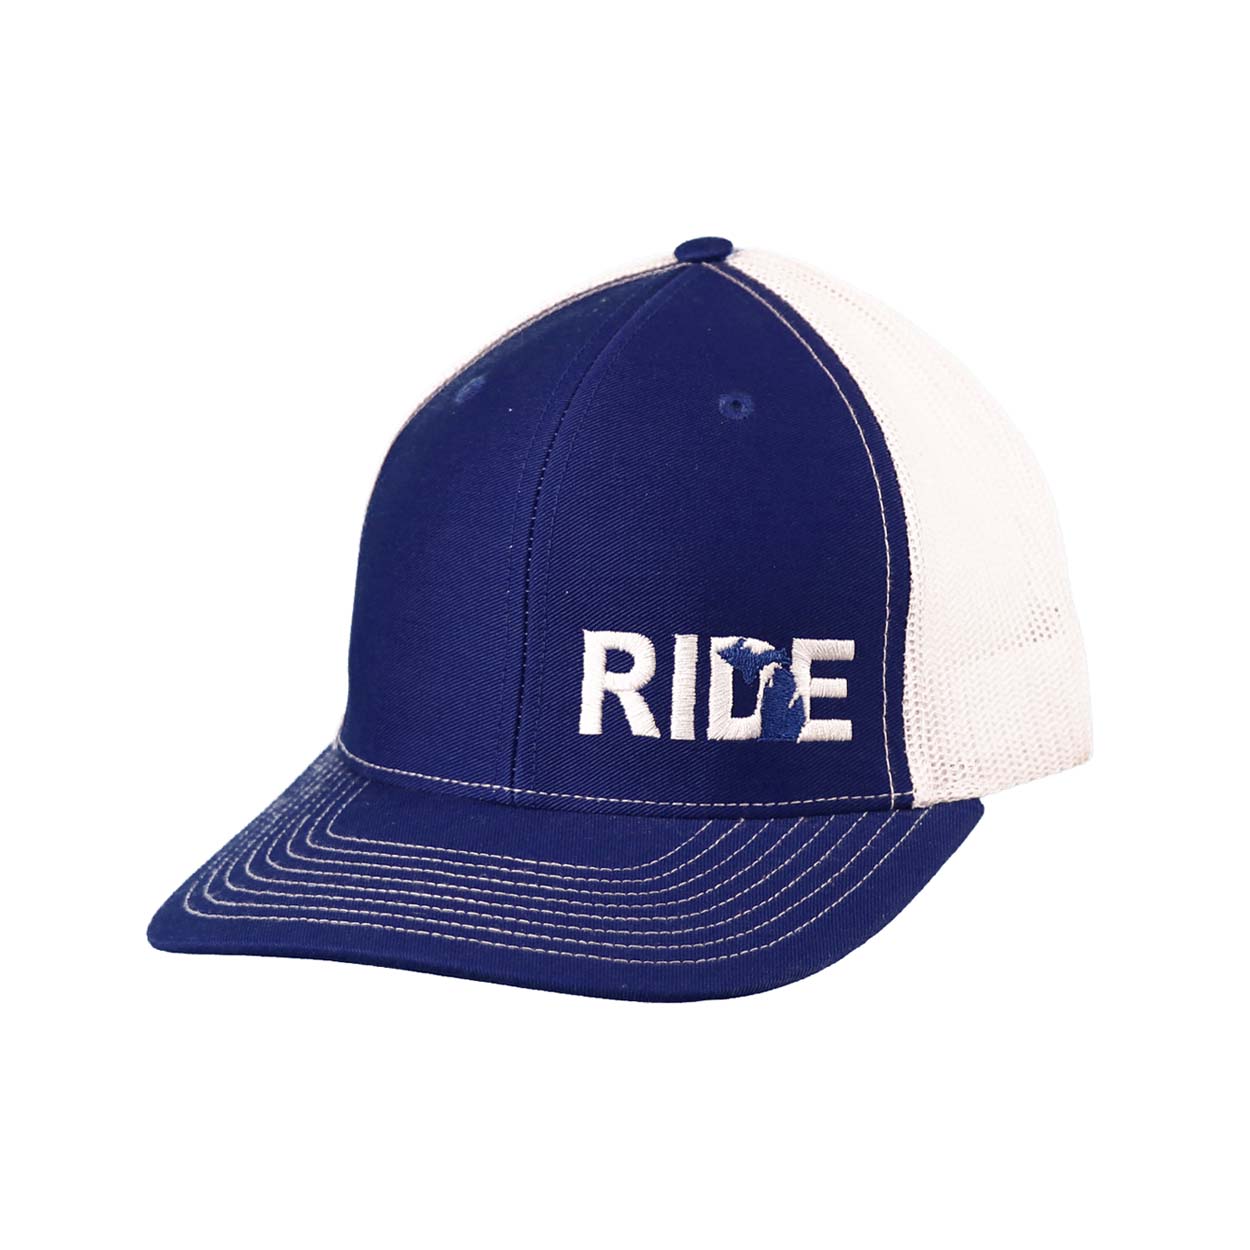 Ride Michigan Night Out Pro Embroidered Snapback Trucker Hat Blue/White